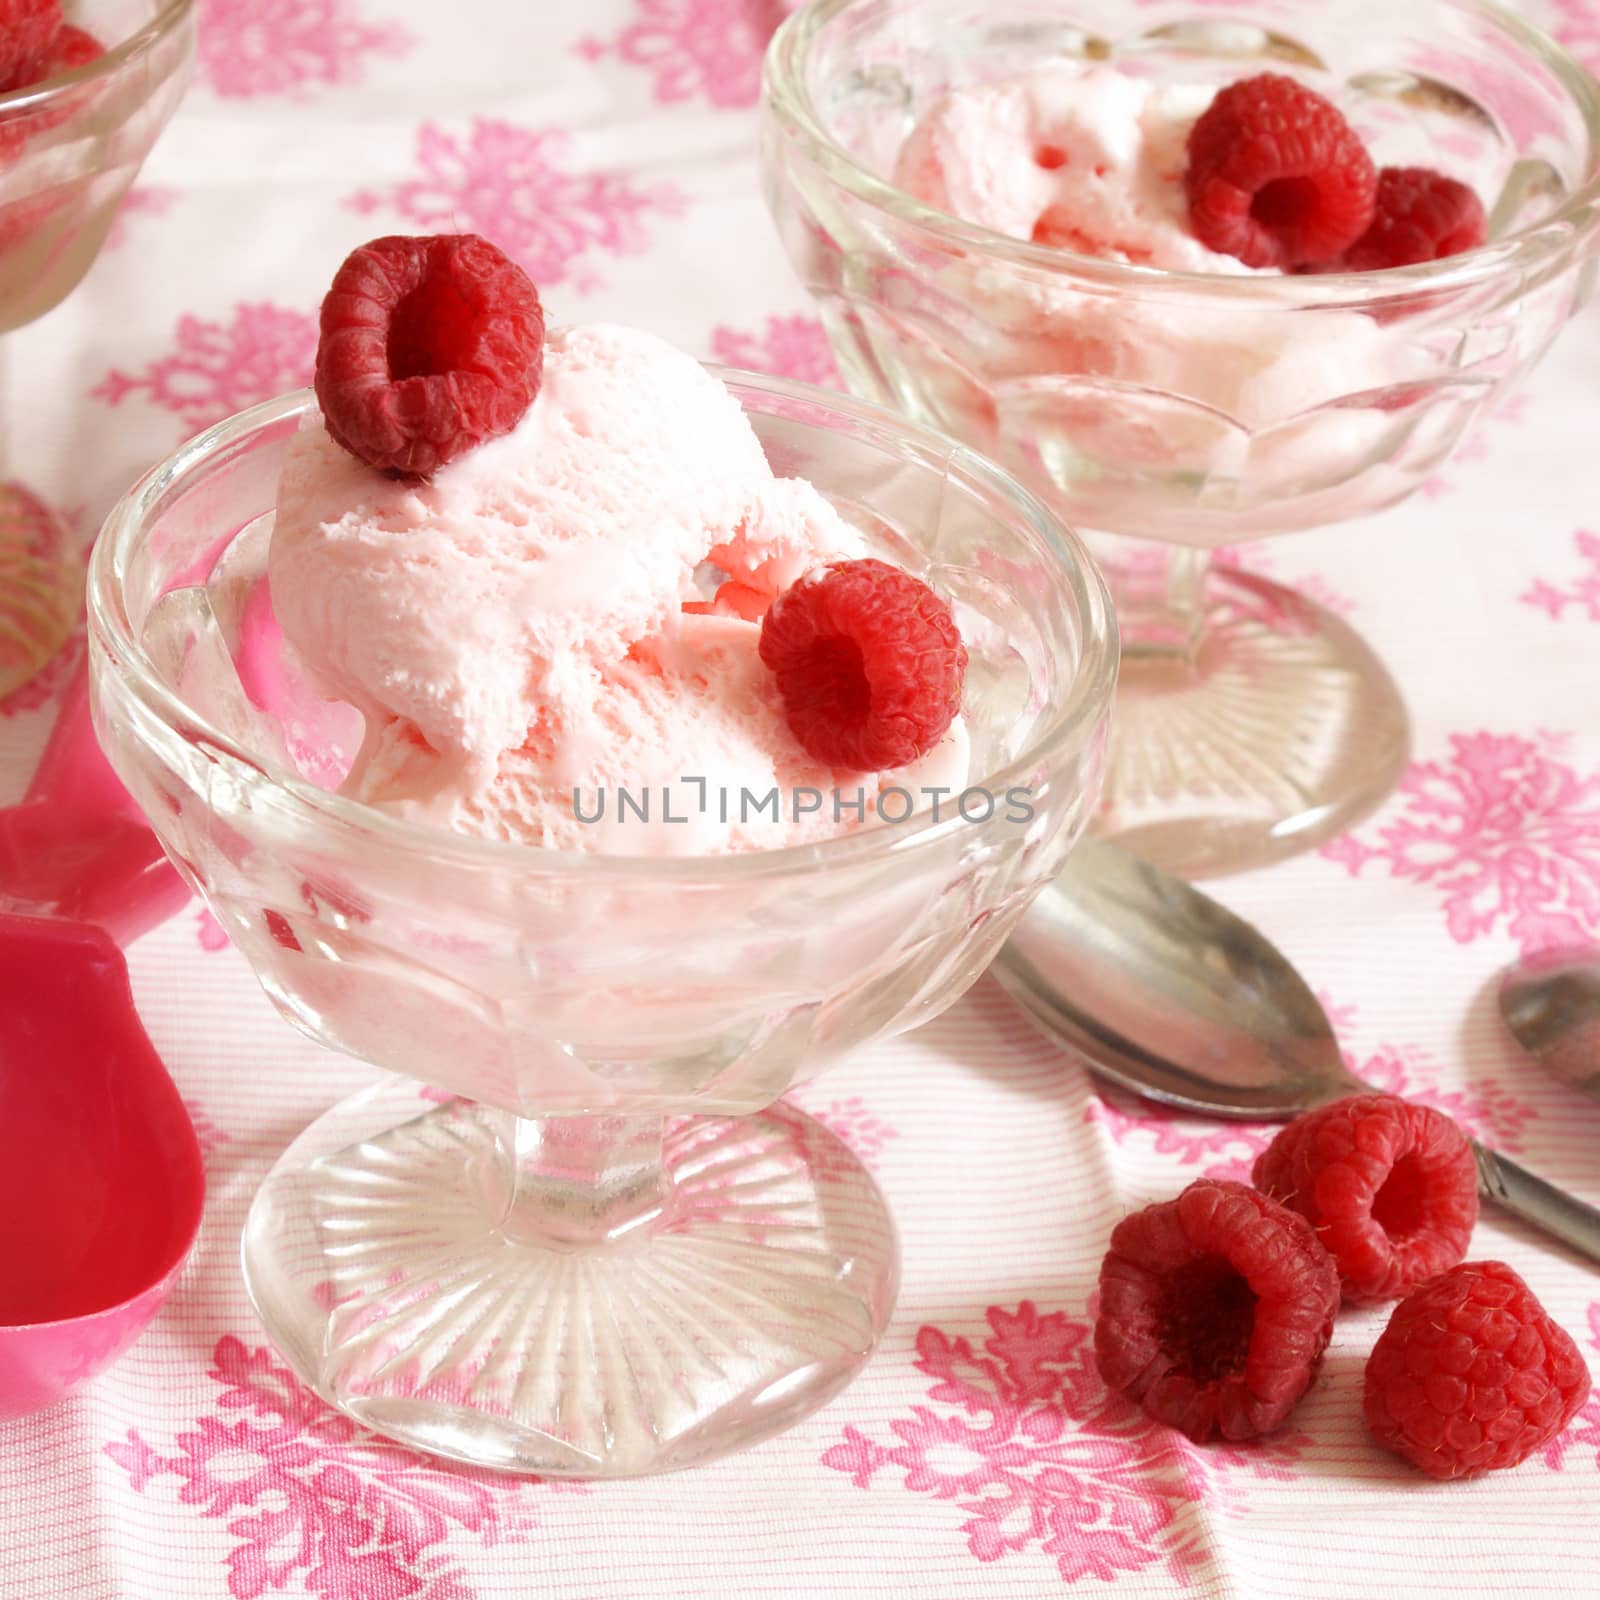 A delicious cup of frozen raspberry ice cream topped with fresh fruit.